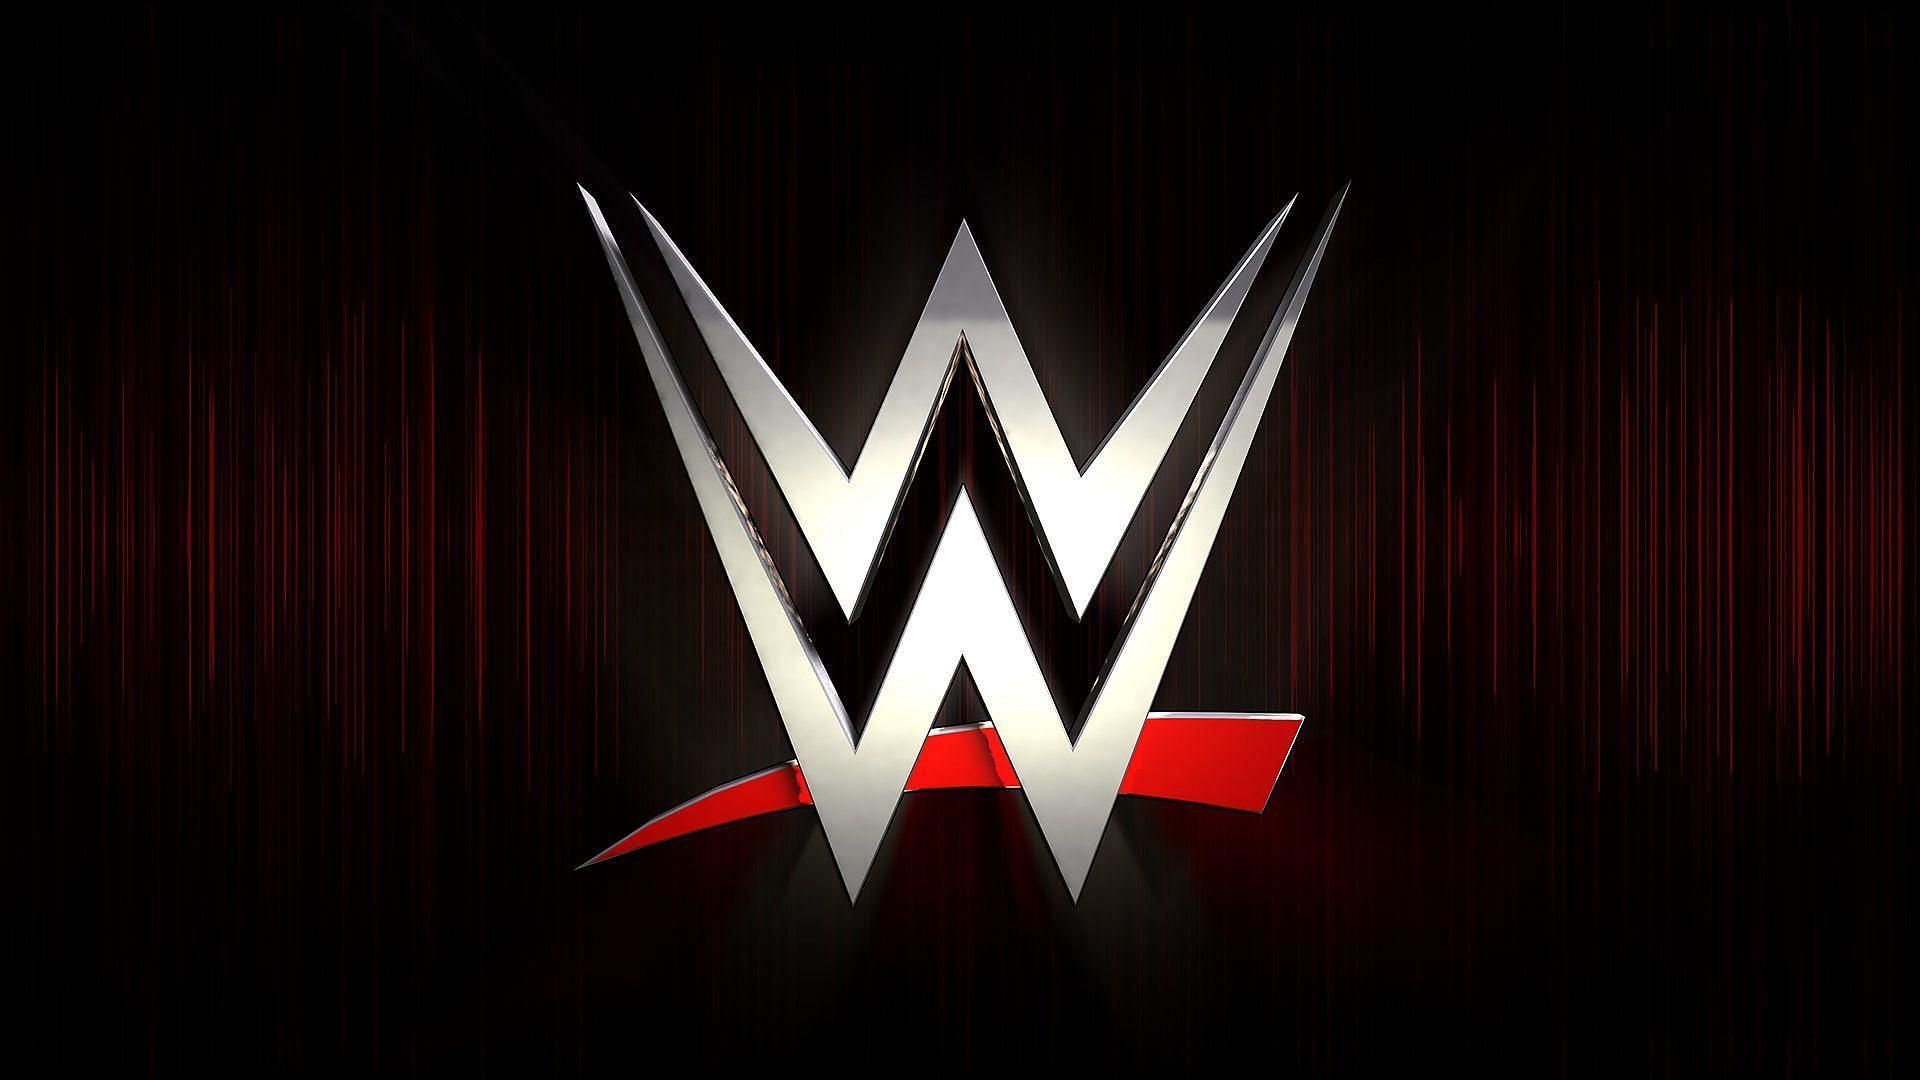 Is this WWE star disappointed with management?